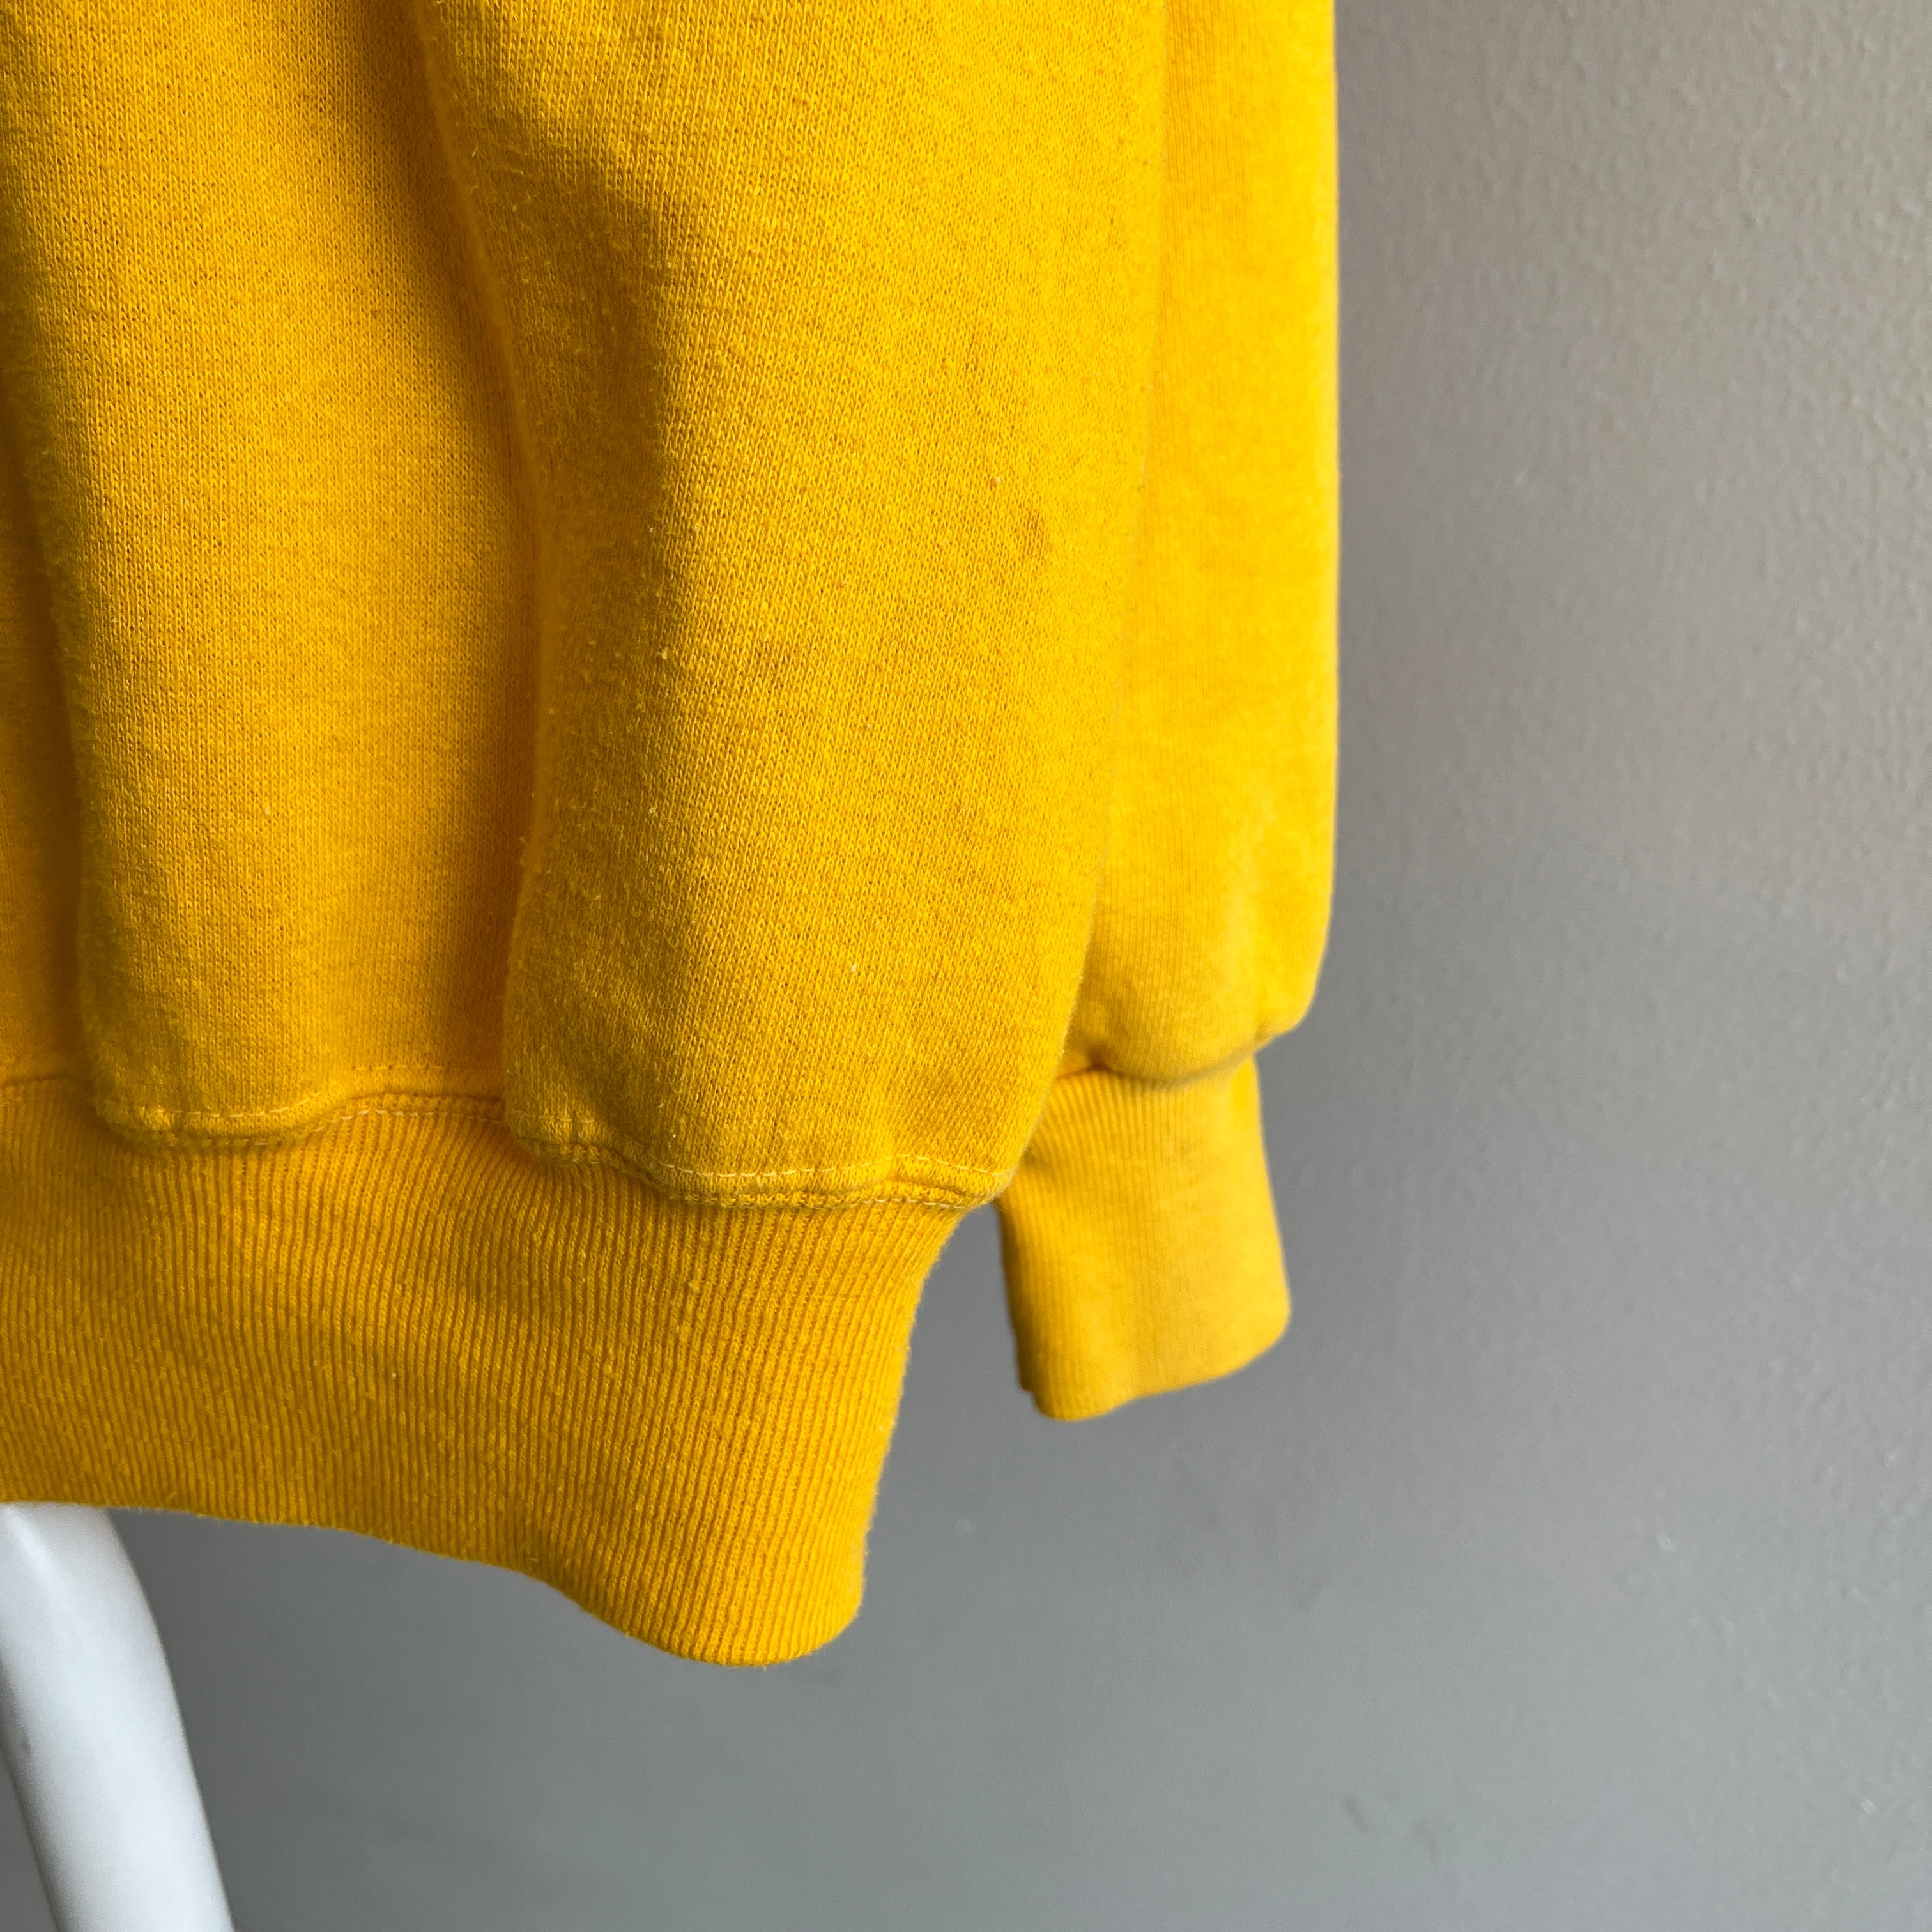 1980s Marigold Yellow Zip Up Hoodie With Fold Fading